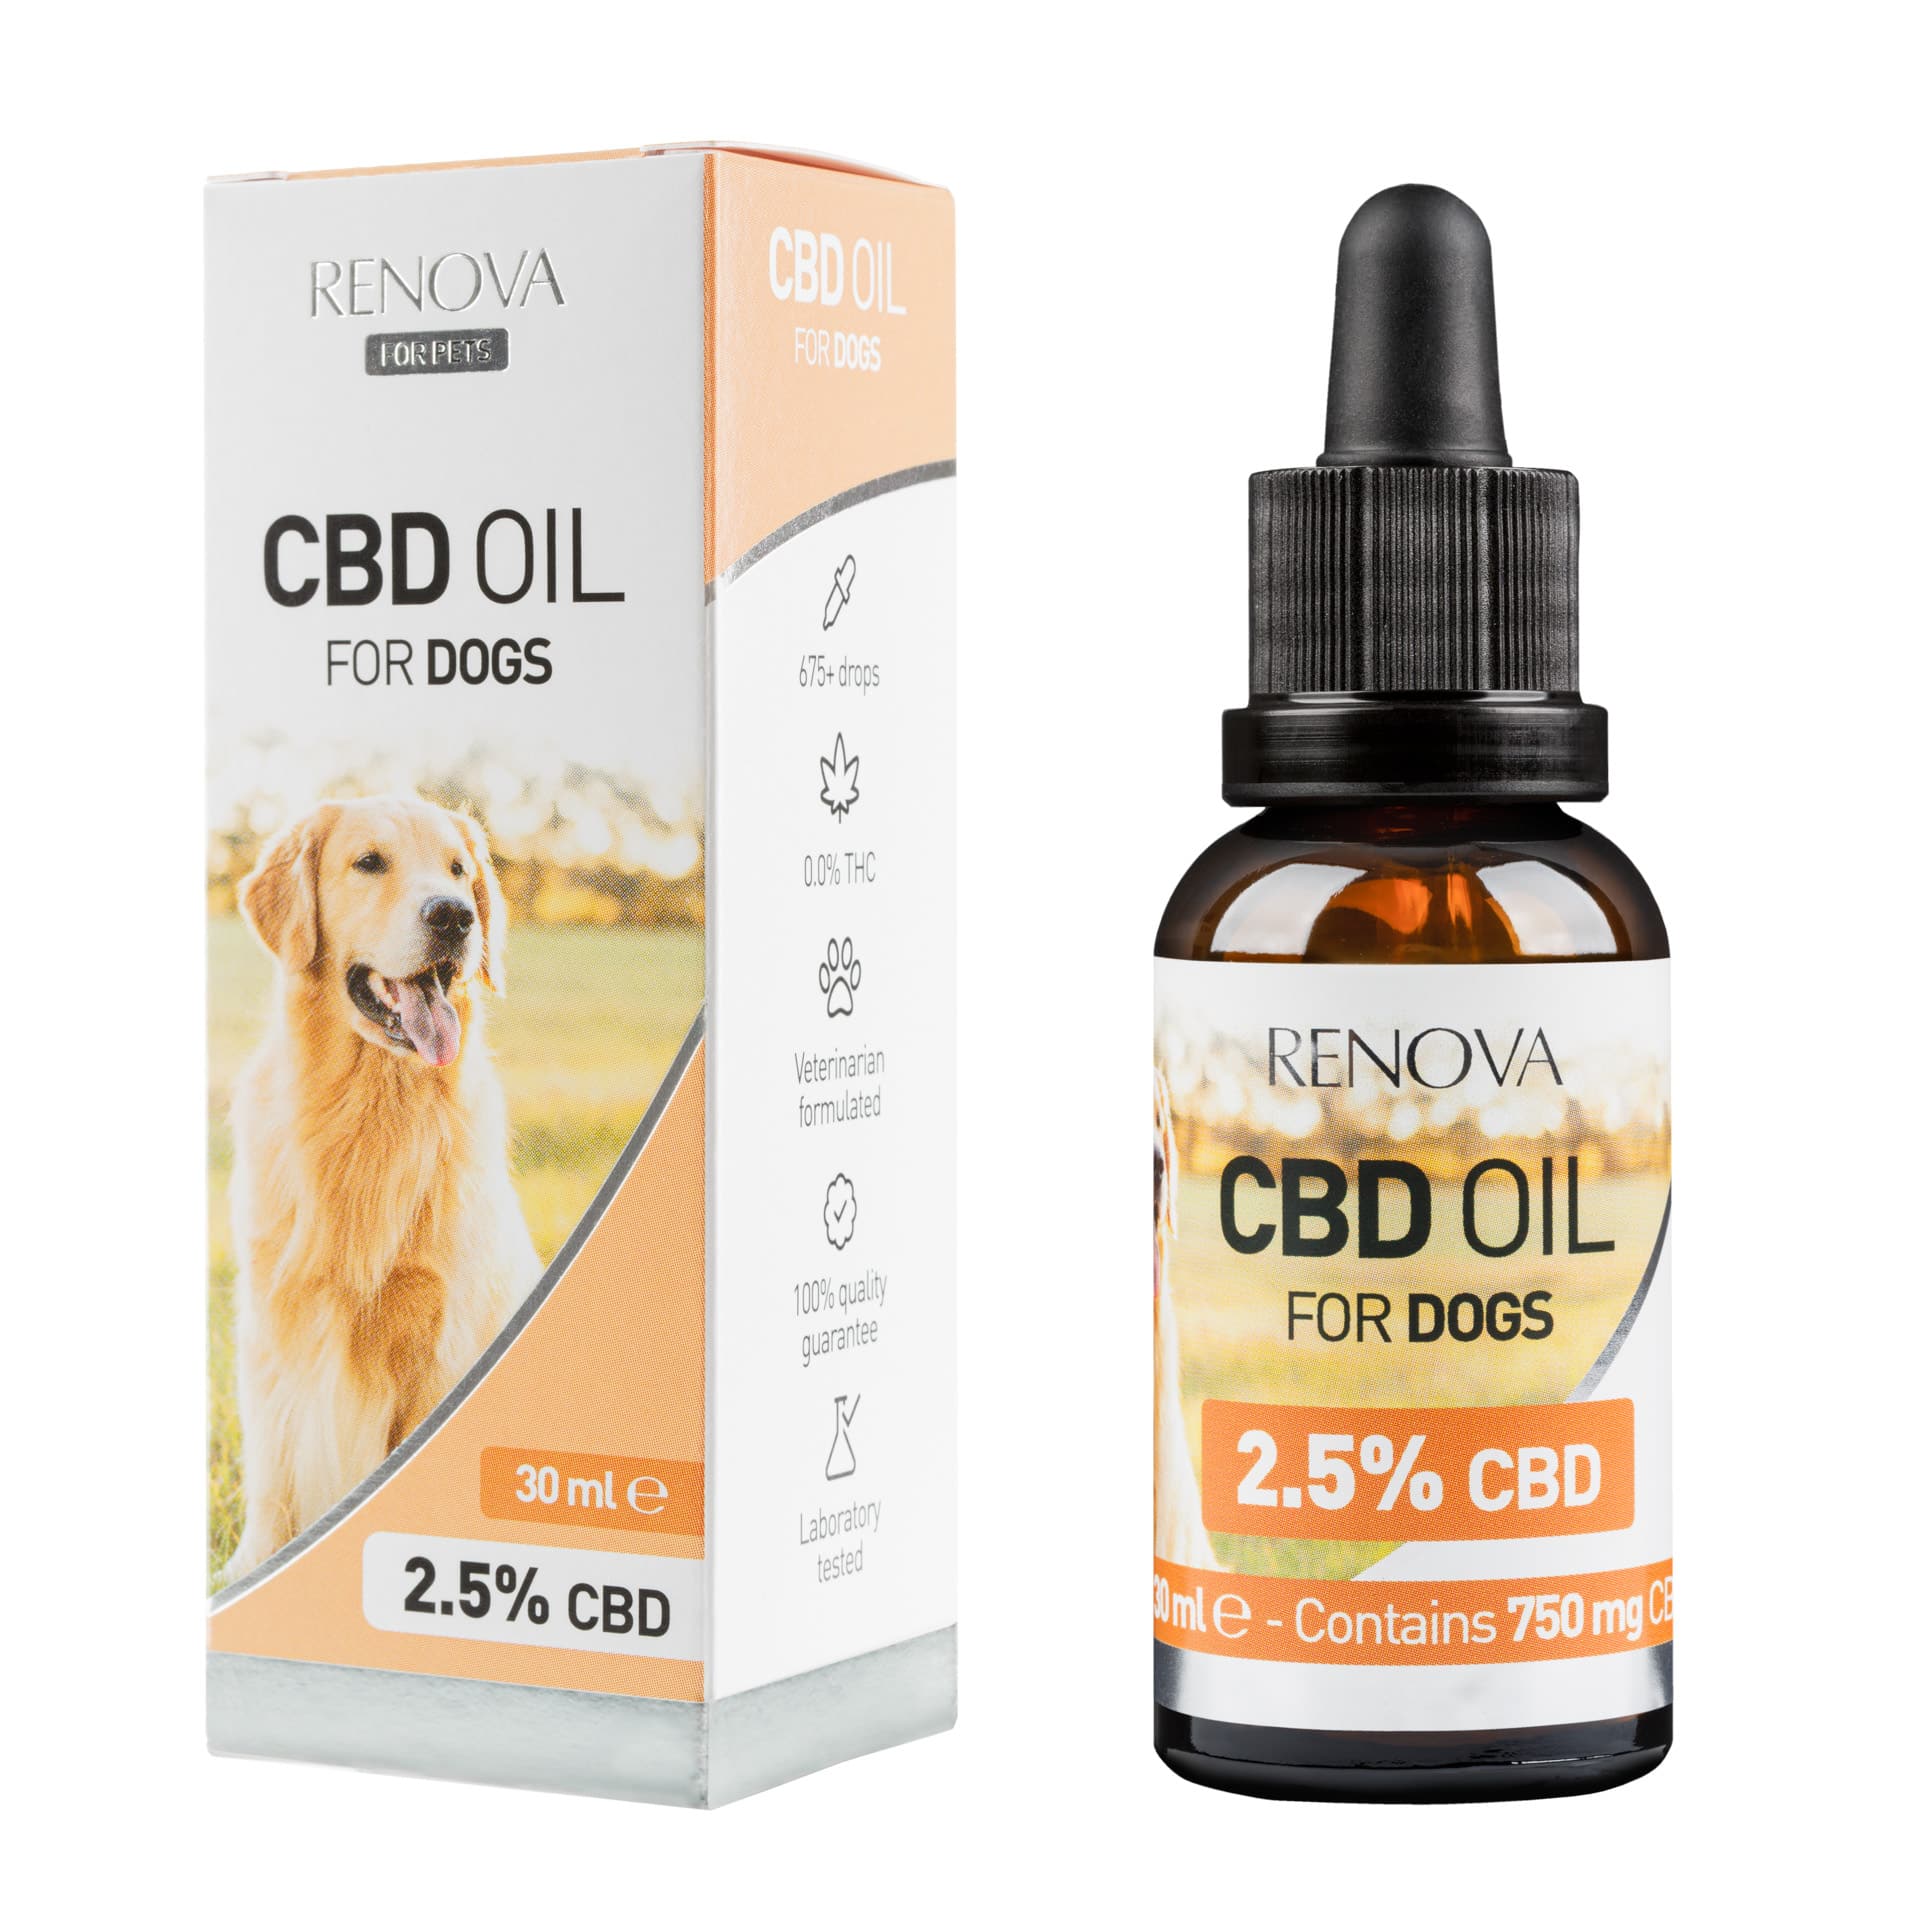 A bottle of Renova - CBD oil 2,5% for dogs (30ml) next to a box of Renova - CBD oil 2,5% for dogs (30ml).